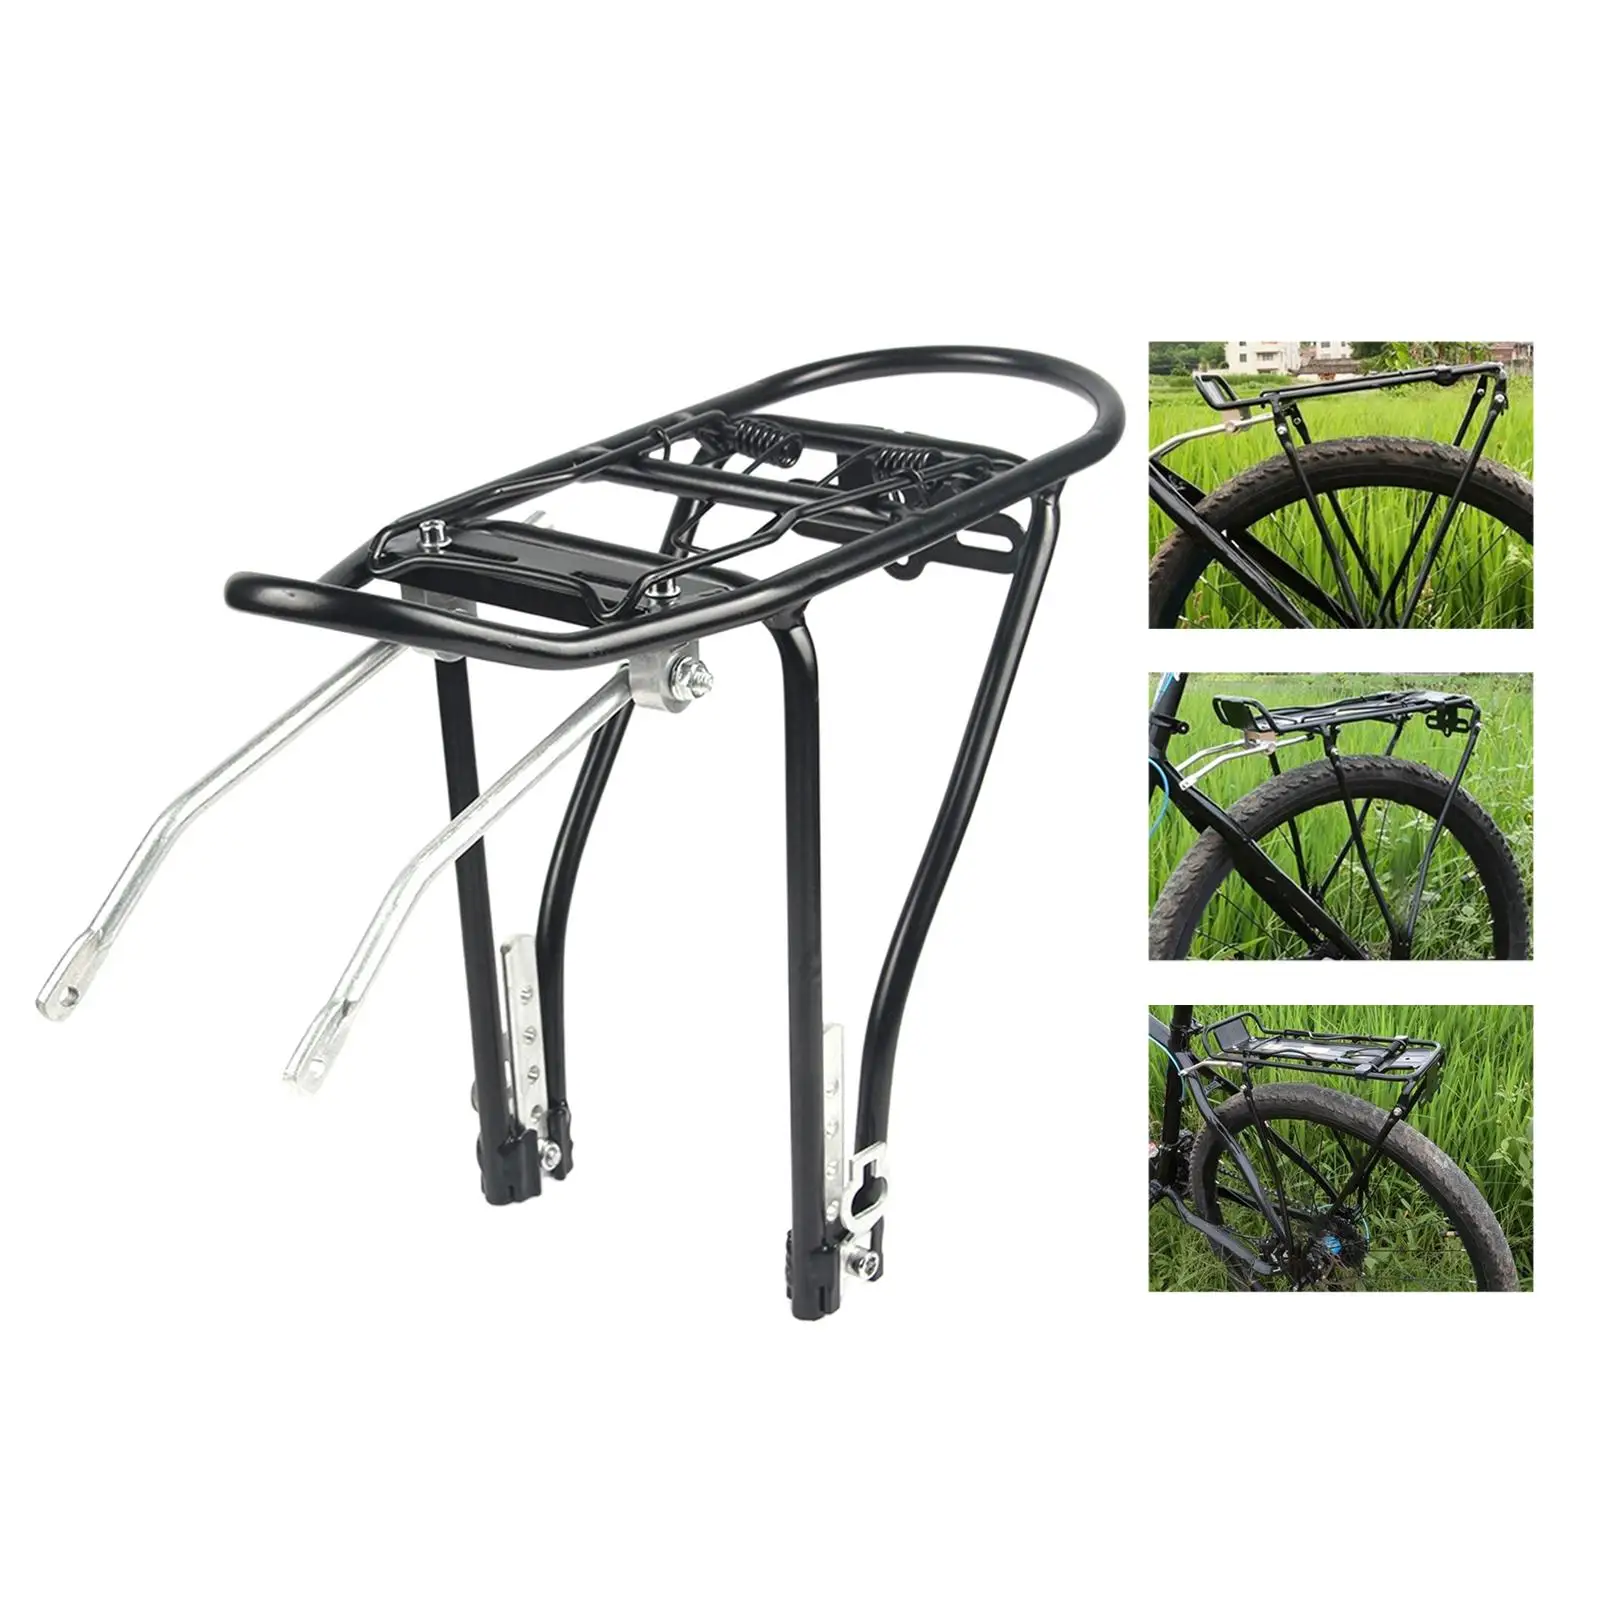 Bicycle Rear Luggage Cargo Rack Panniers Alloy Carrier for Parts Load Limit 88 lbs/40kg Suitable for 14